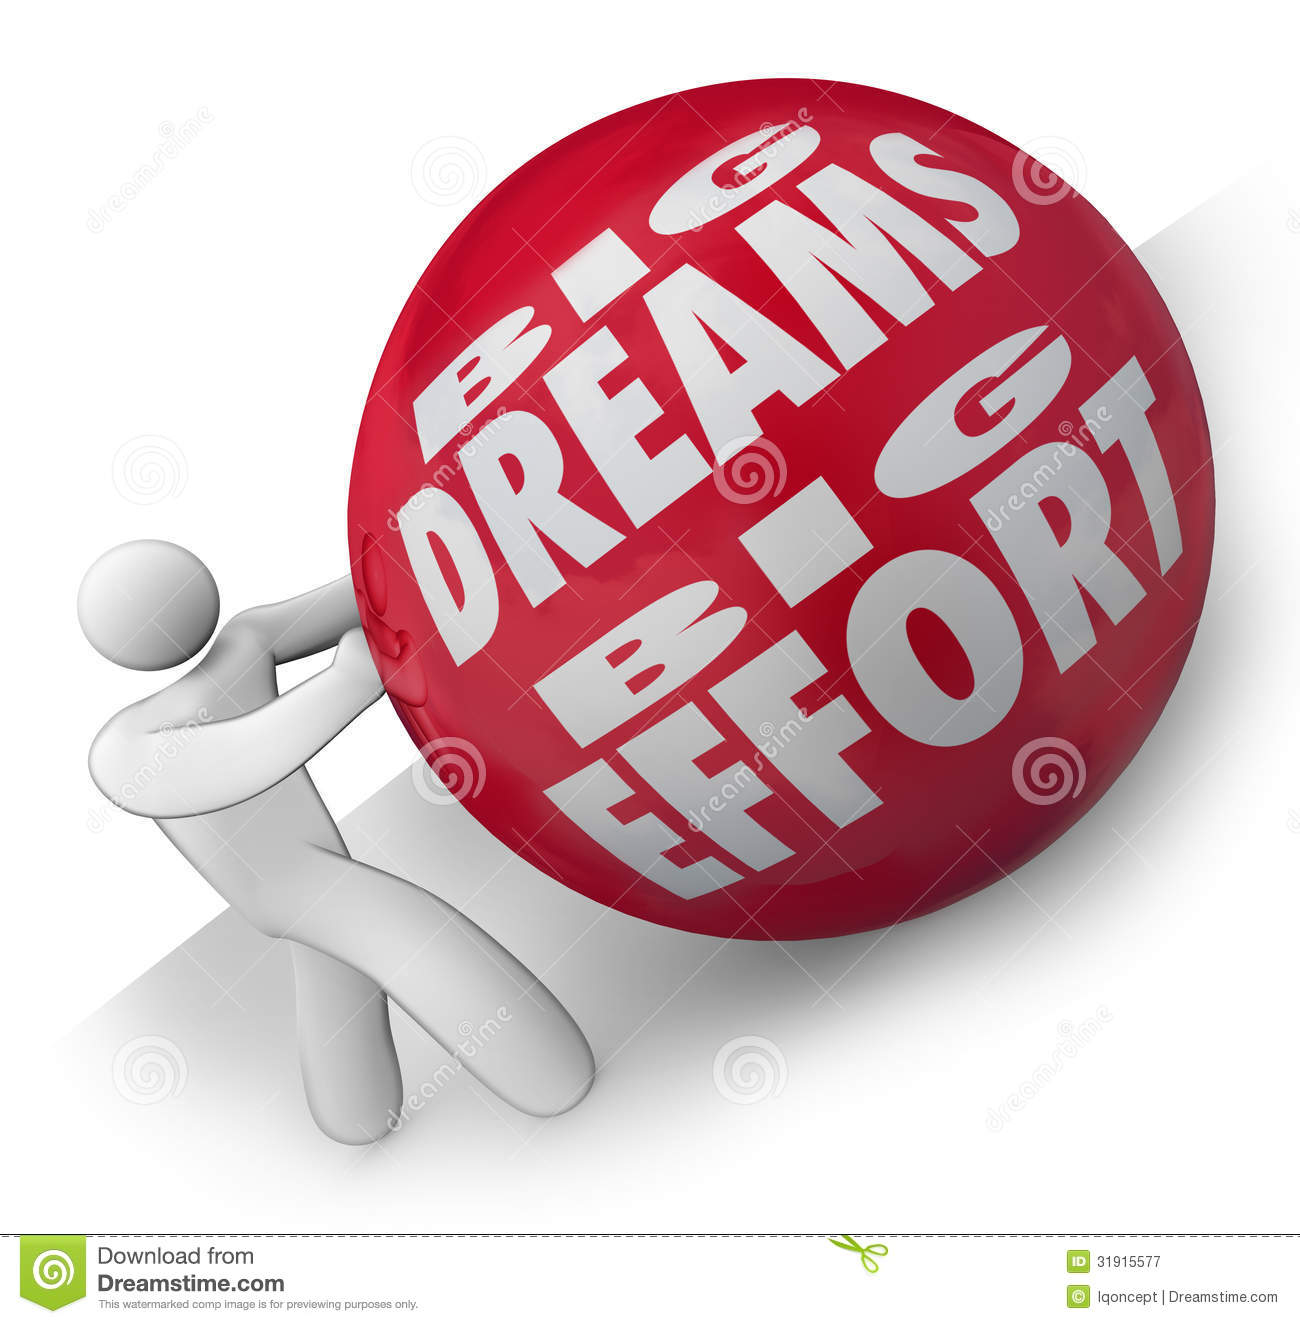 Big Dreams And Effort Person Rolling Ball Uphill To Goal Royalty Free    